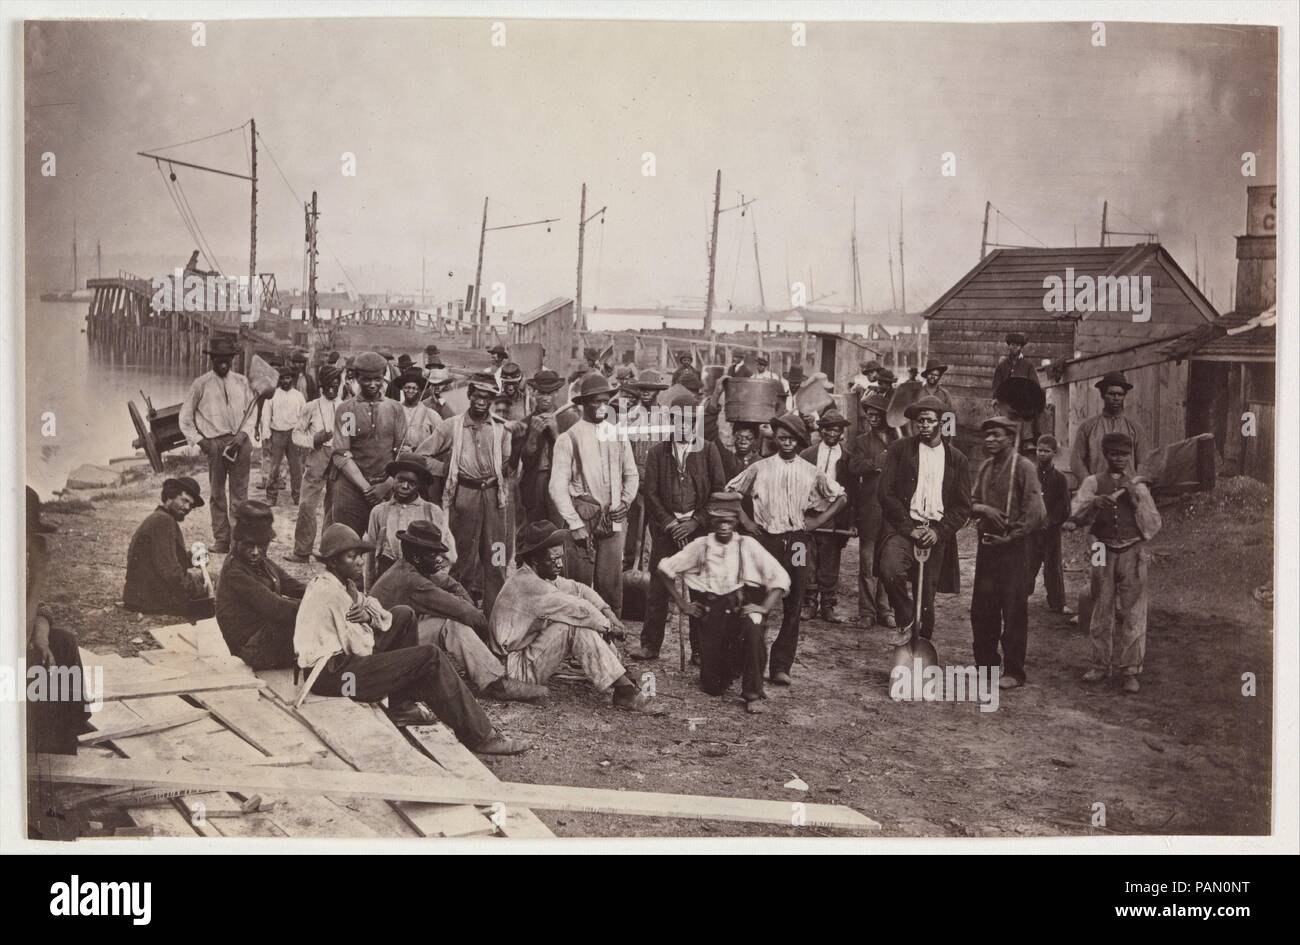 Laborers at Quartermaster's Wharf, Alexandria, Virginia. Artist: Attributed to Andrew Joseph Russell (American, 1830-1902). Dimensions: Image: 13.2 × 20.2 cm (5 3/16 × 7 15/16 in.). Former Attribution: Formerly attributed to Mathew B. Brady (American, born Ireland, 1823?-1896 New York). Date: 1863-65.  The United States Quartermaster's office managed the supply, warehousing, and distribution of food, fuel, ordnance, medical supplies, forage for animals, and even mail delivery for the army. This extraordinary view shows a group of emancipated slaves who worked as paid laborers for the army alon Stock Photo